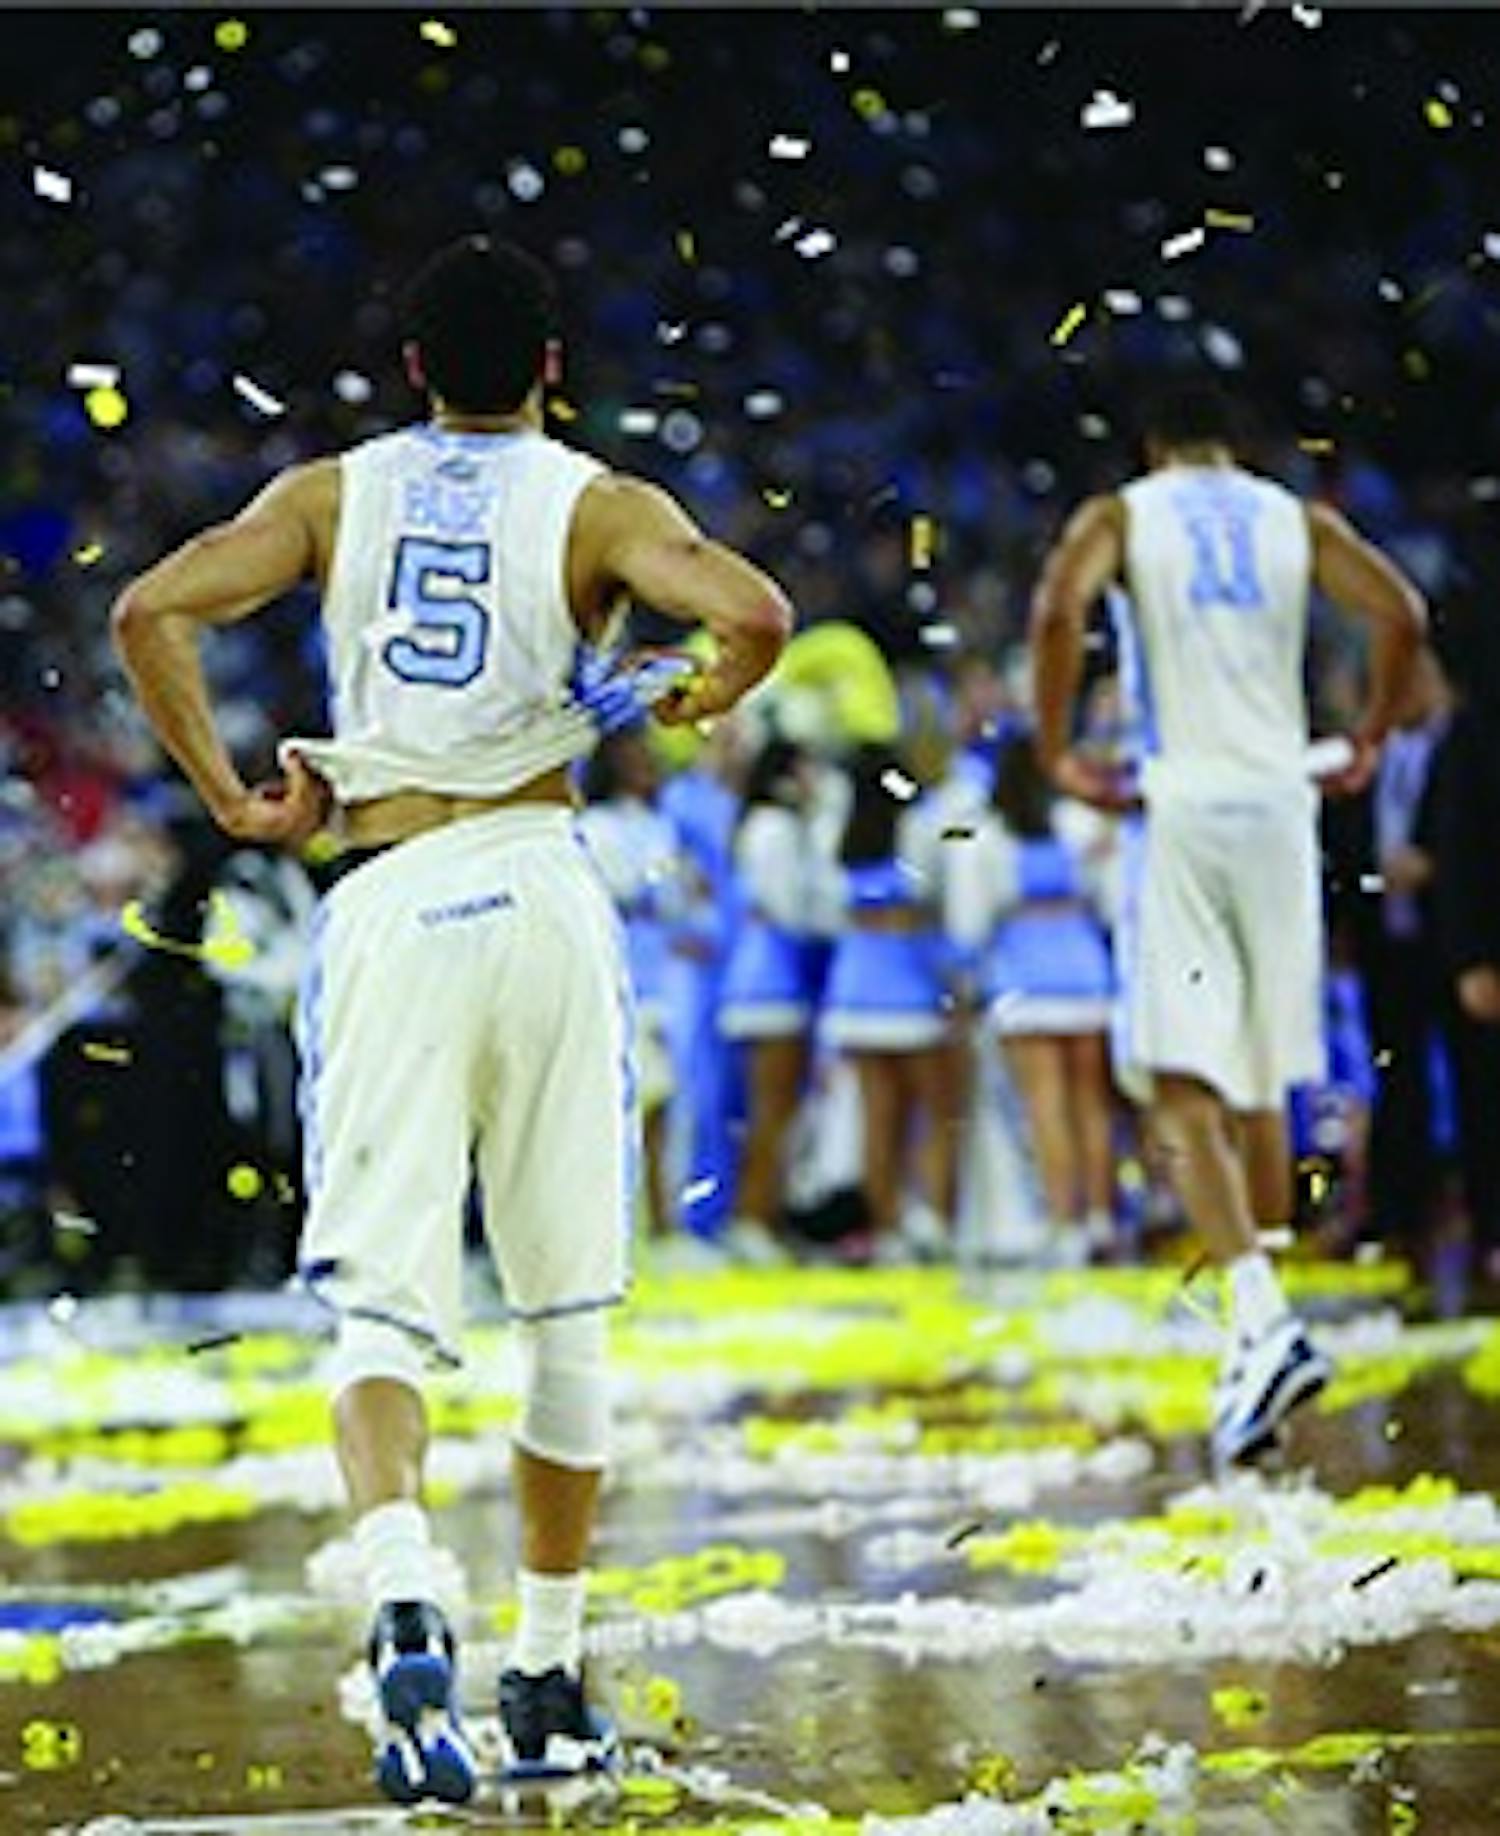 Seniors Marcus Paige (5) and Brice Johnson (11) walk off the court after the 74-77 loss against Villanova.